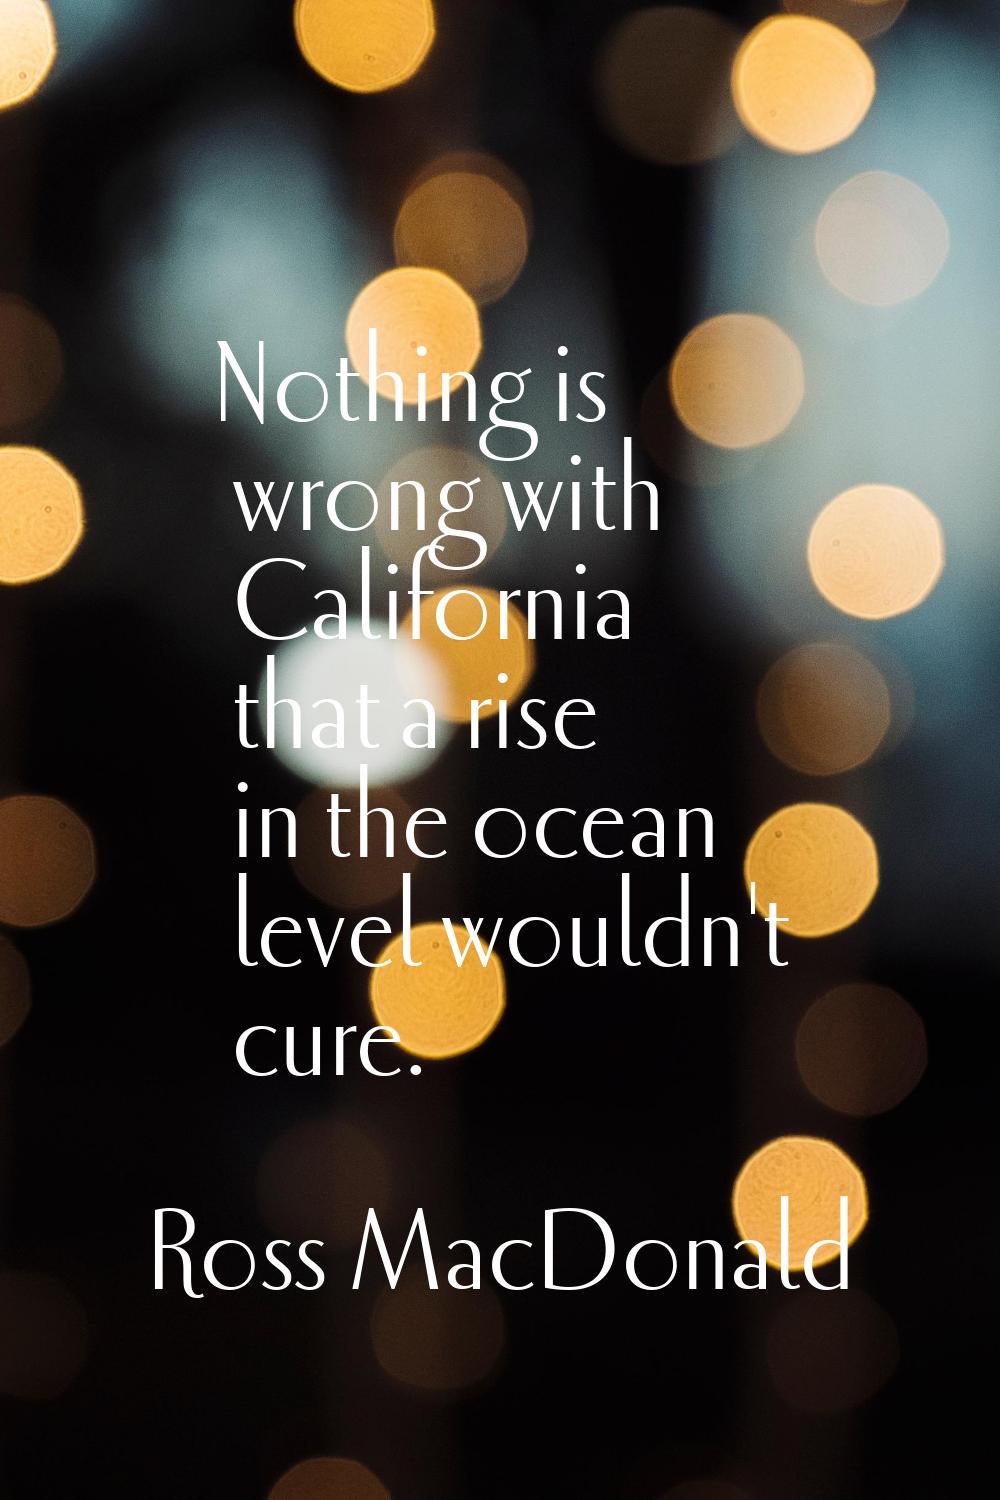 Nothing is wrong with California that a rise in the ocean level wouldn't cure.